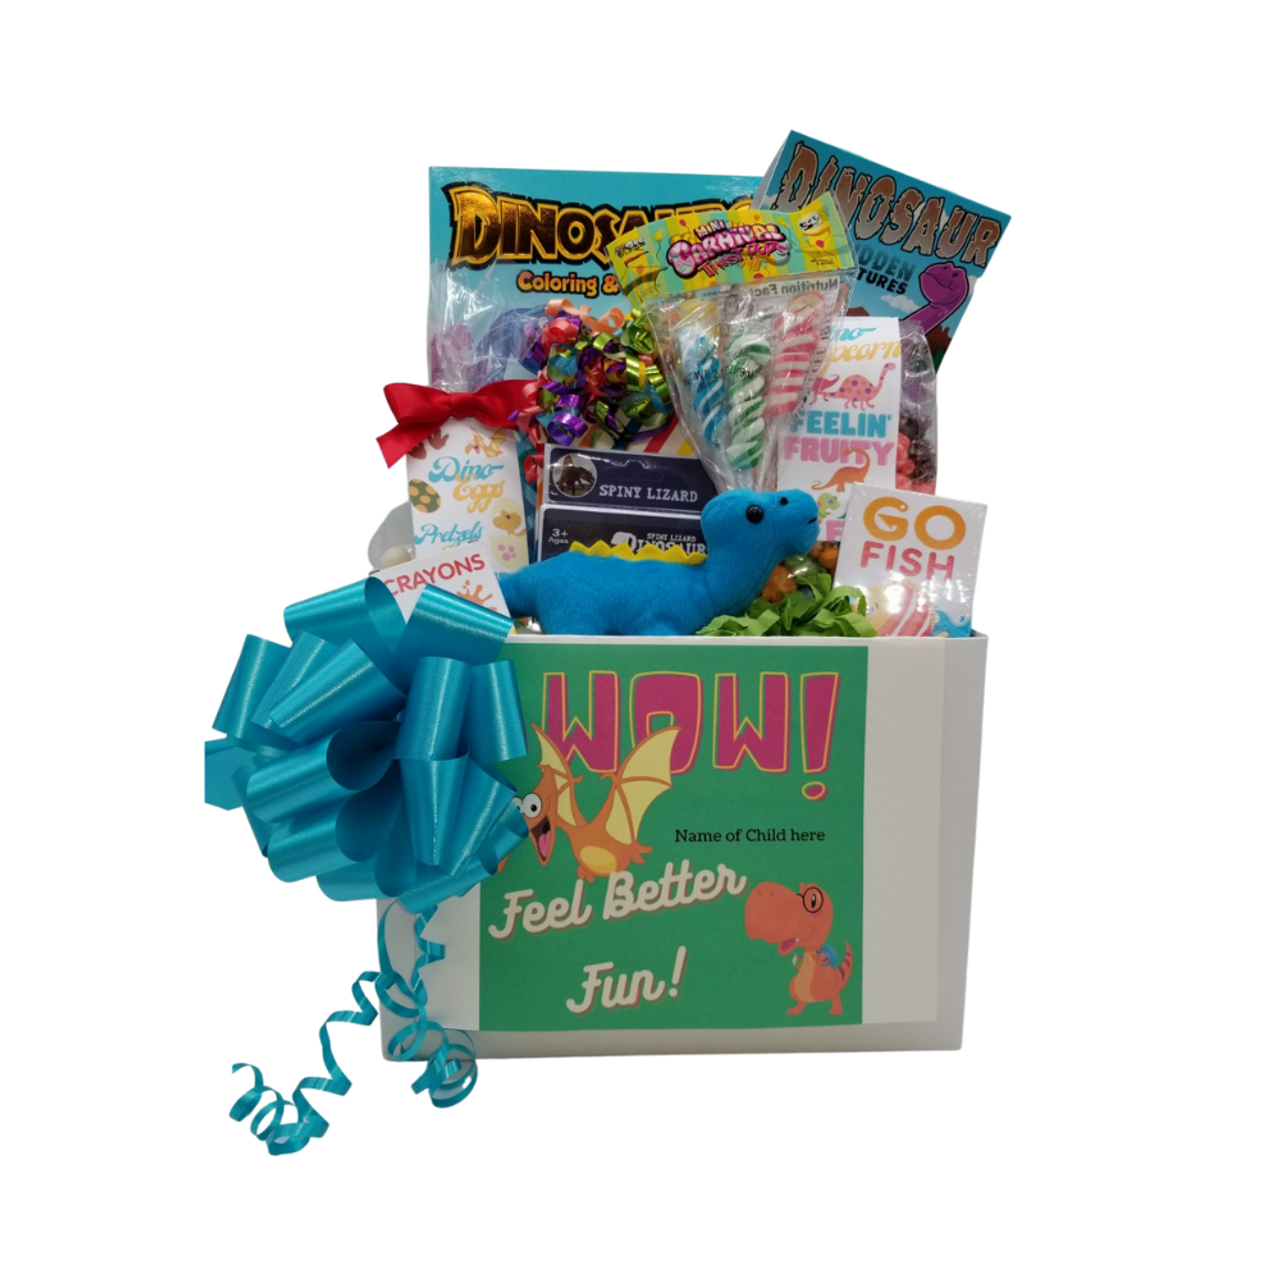 Get Well Dinosaur Fun - Personalized Gift Basket Box - The